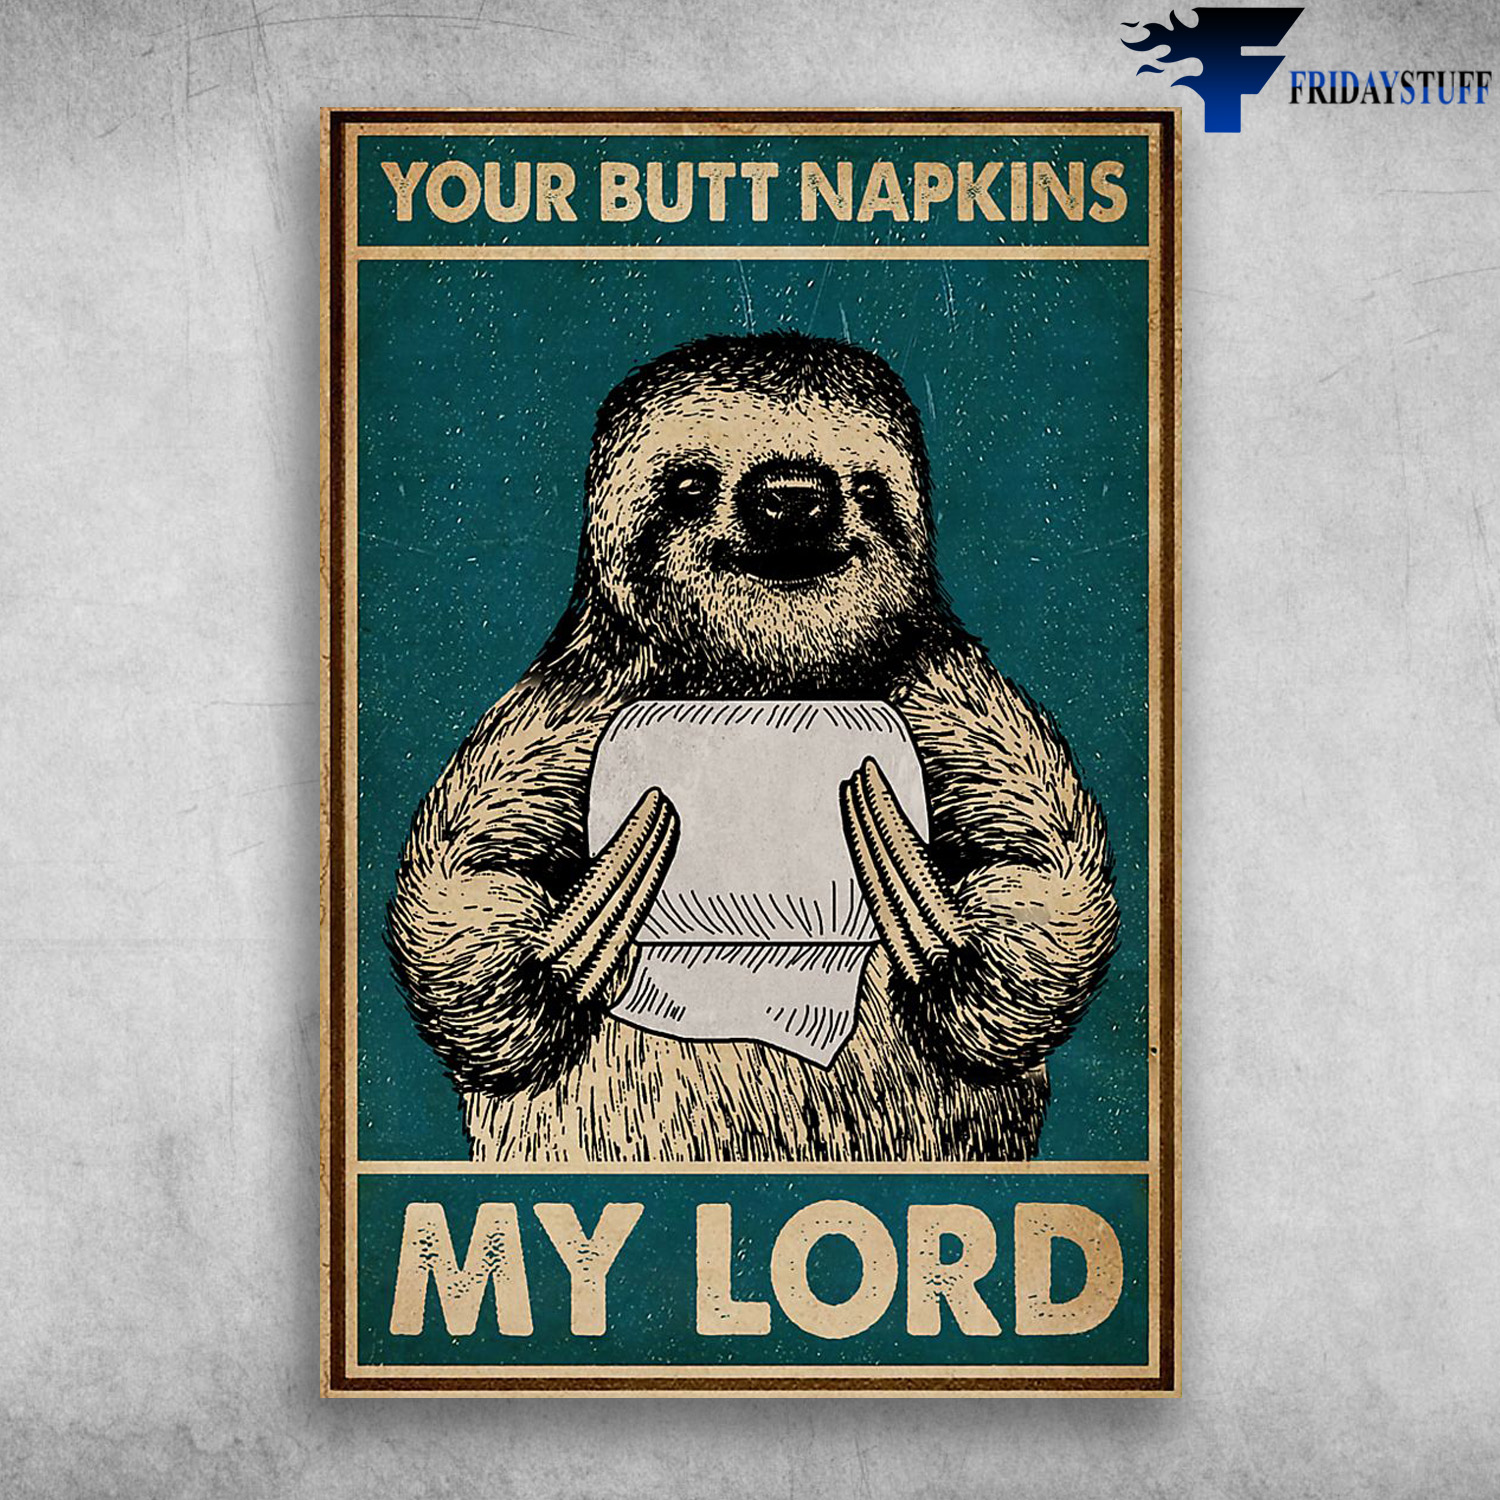 Your Butt Napkins My Lord - Sloth And Paper Toilet